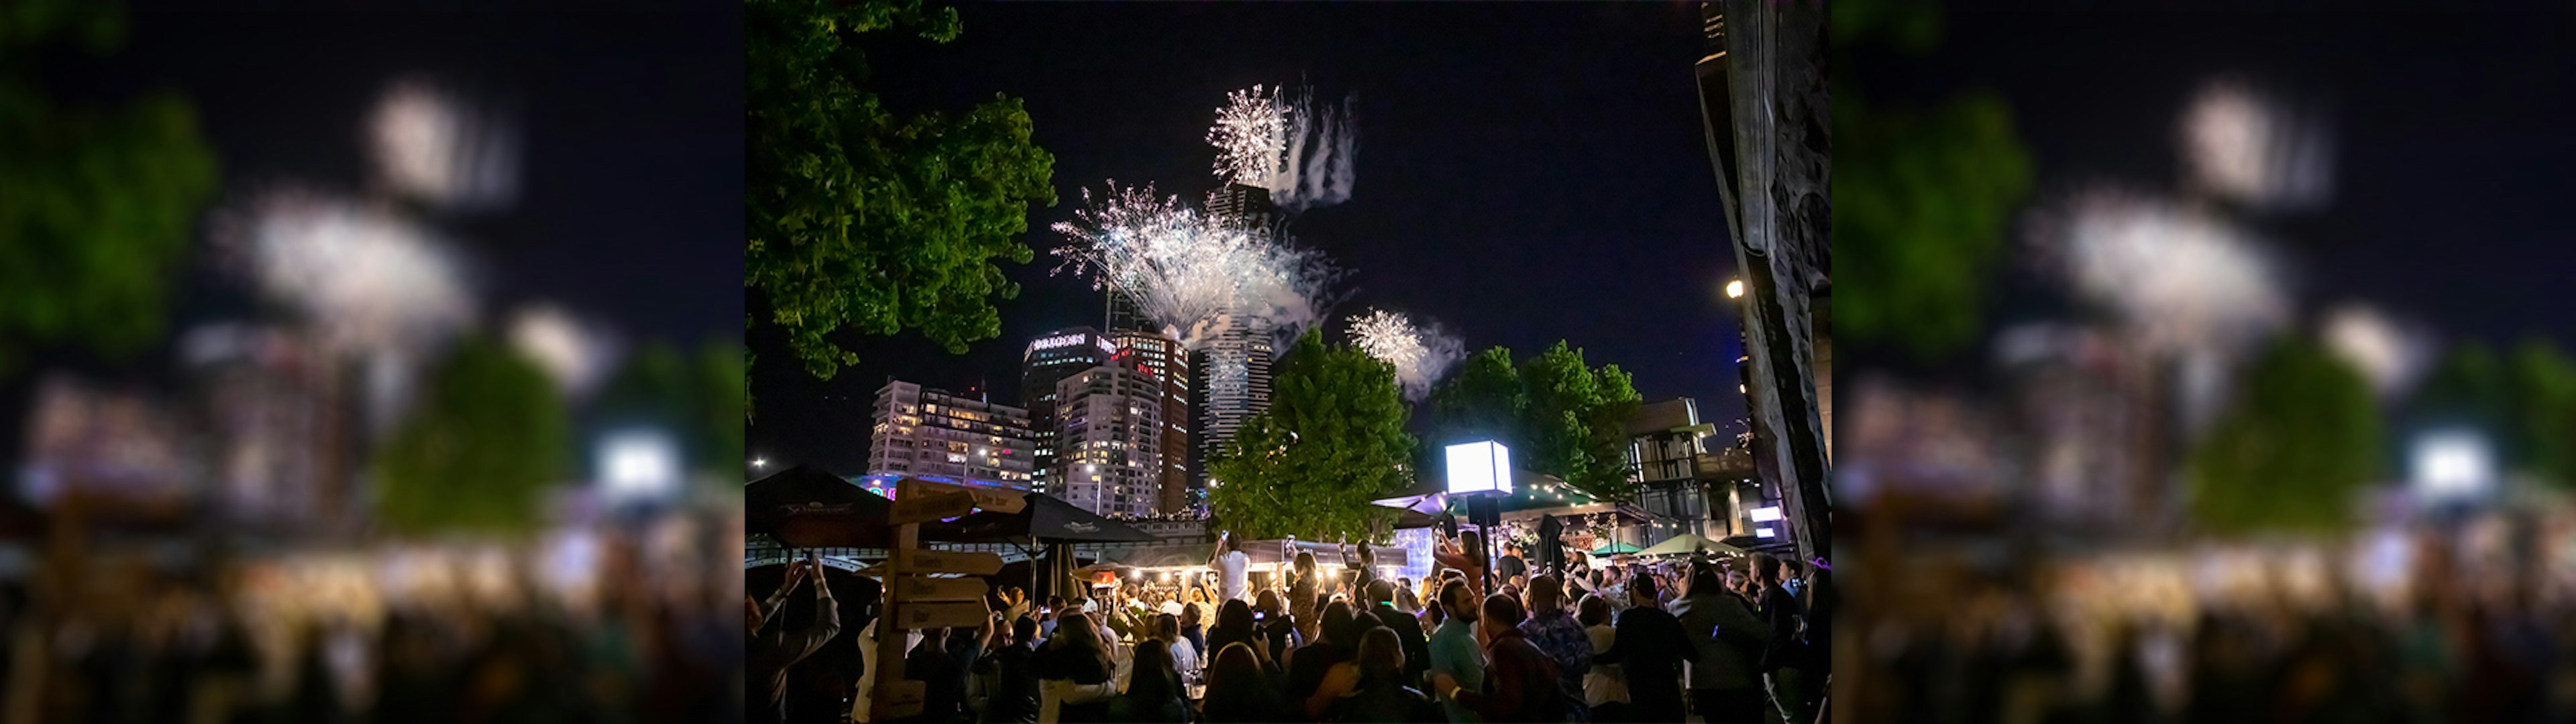 Riverland Bar along the Yarra River of an evening with fireworks overhead